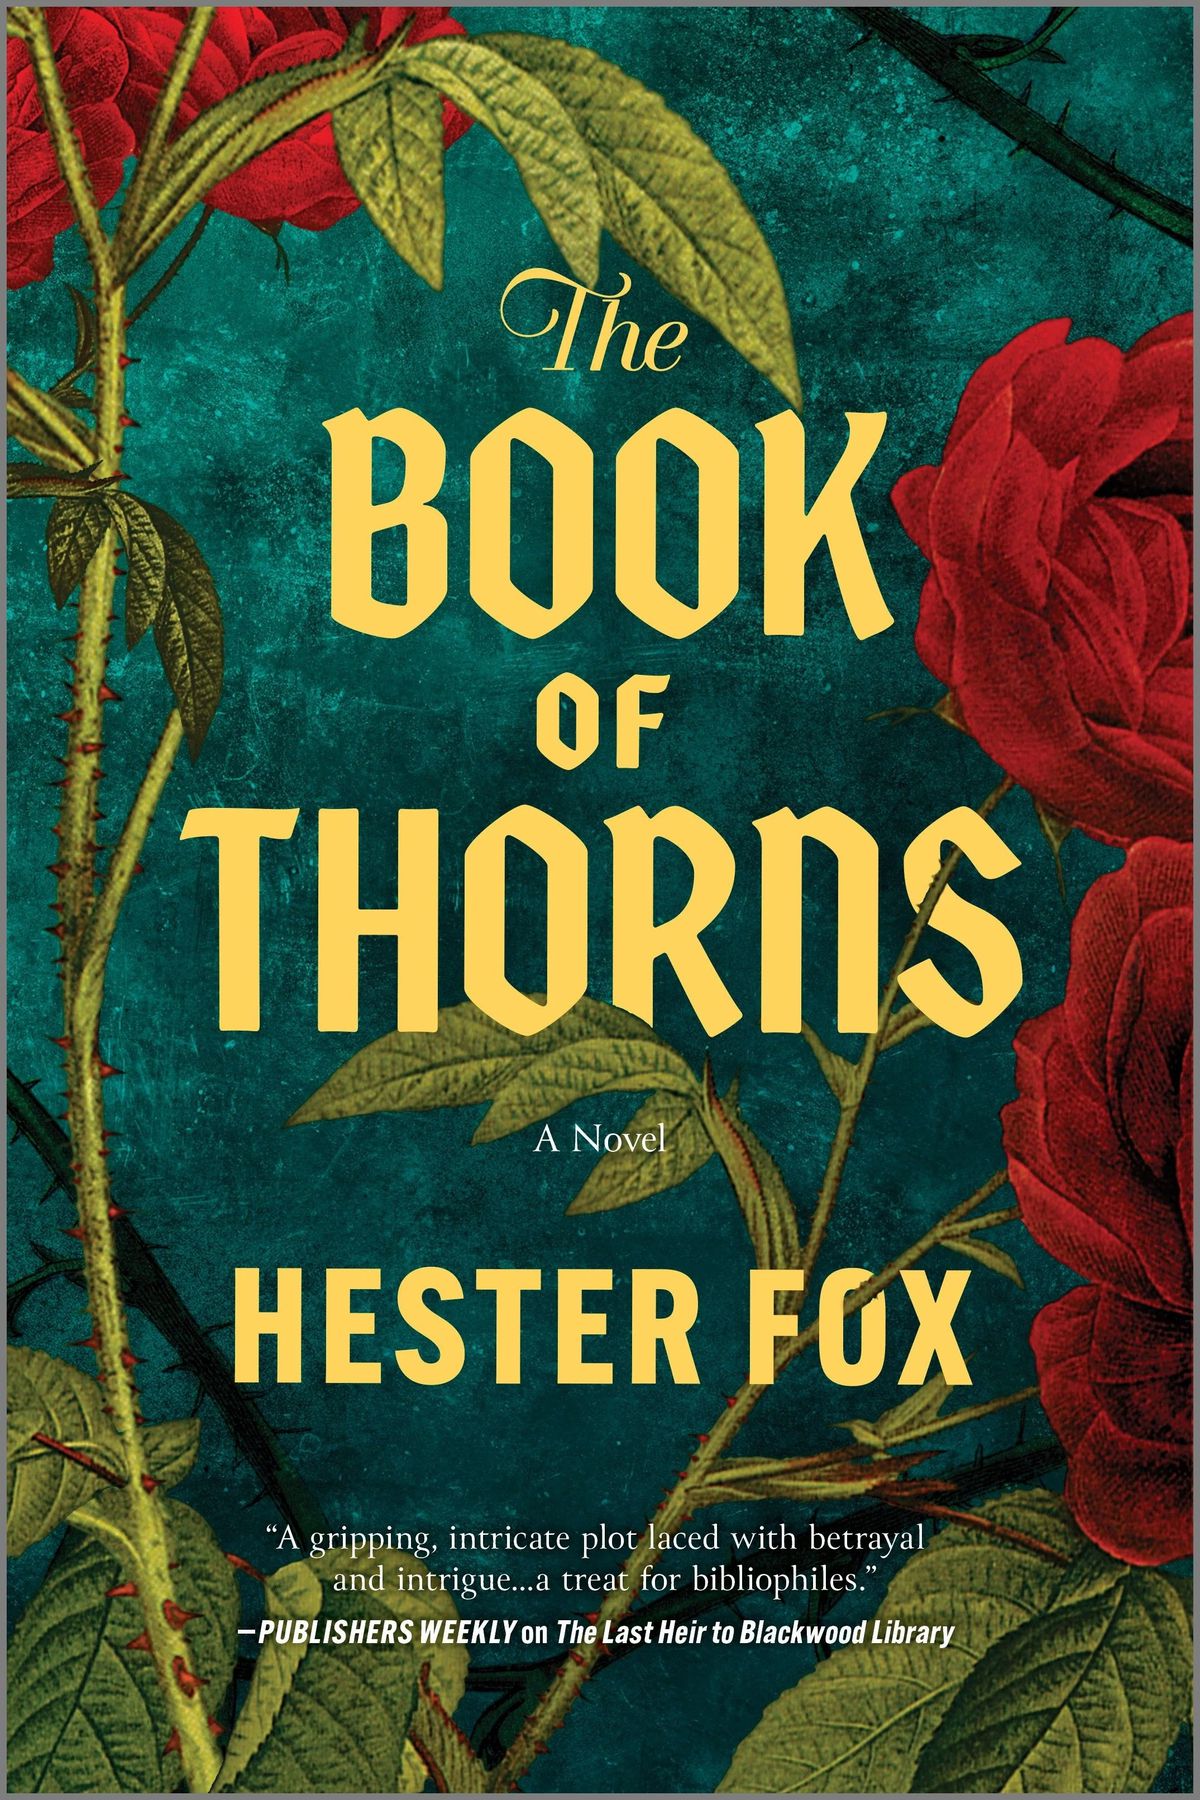 The Book of Thorns cover shows roses with thorns sticking out of their sides.